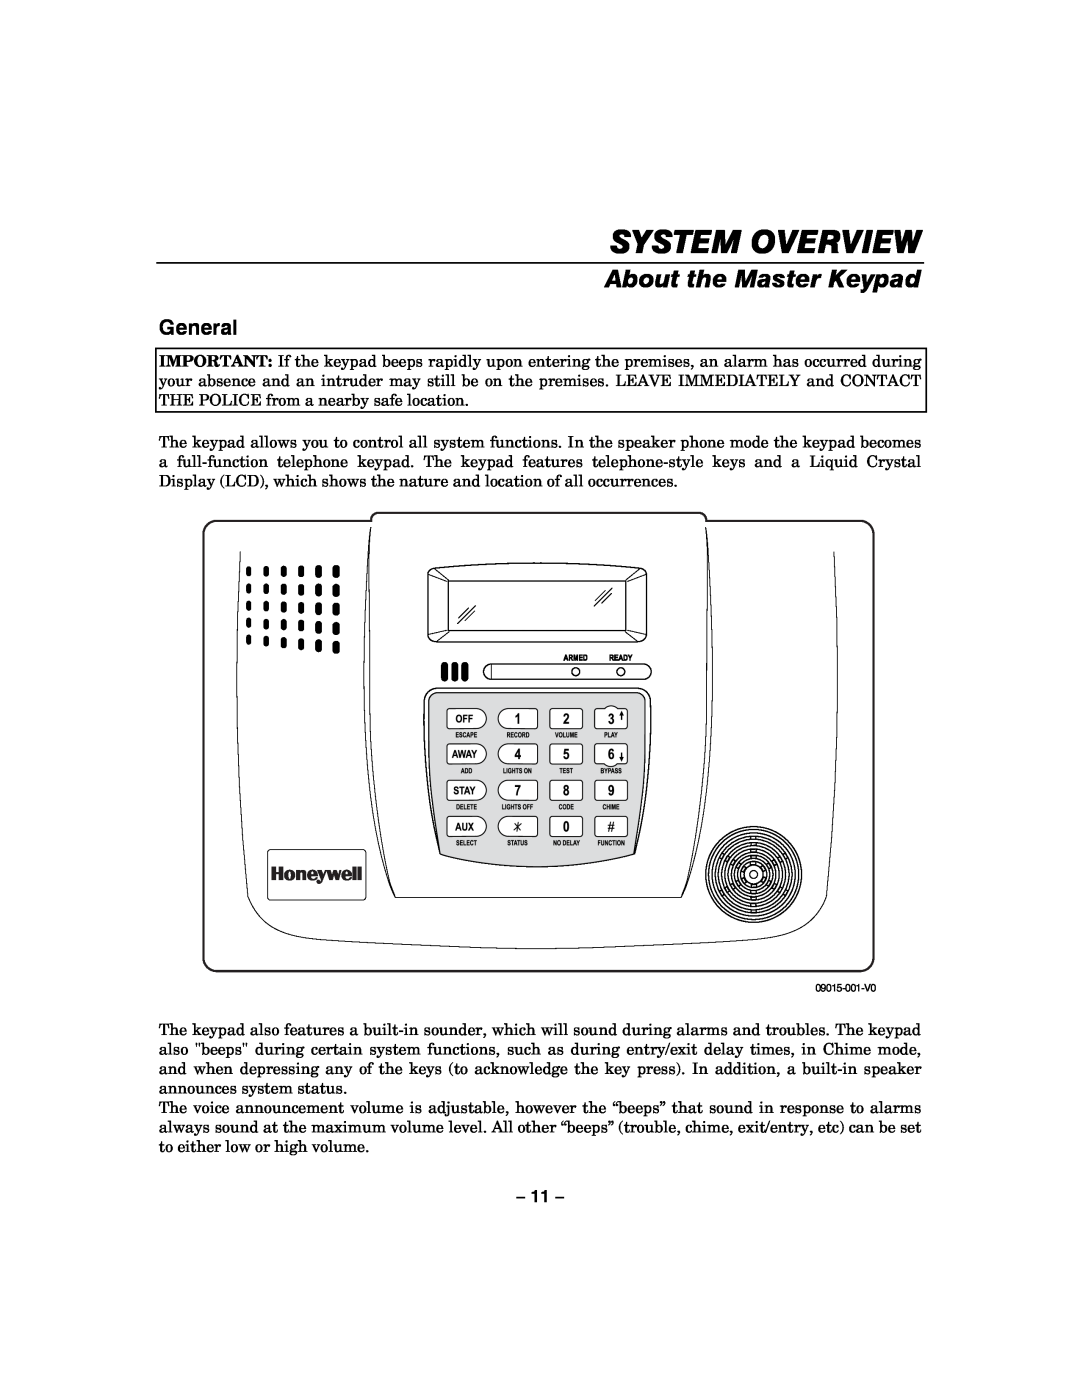 Honeywell LYNXR-2 manual About the Master Keypad, General, System Overview 